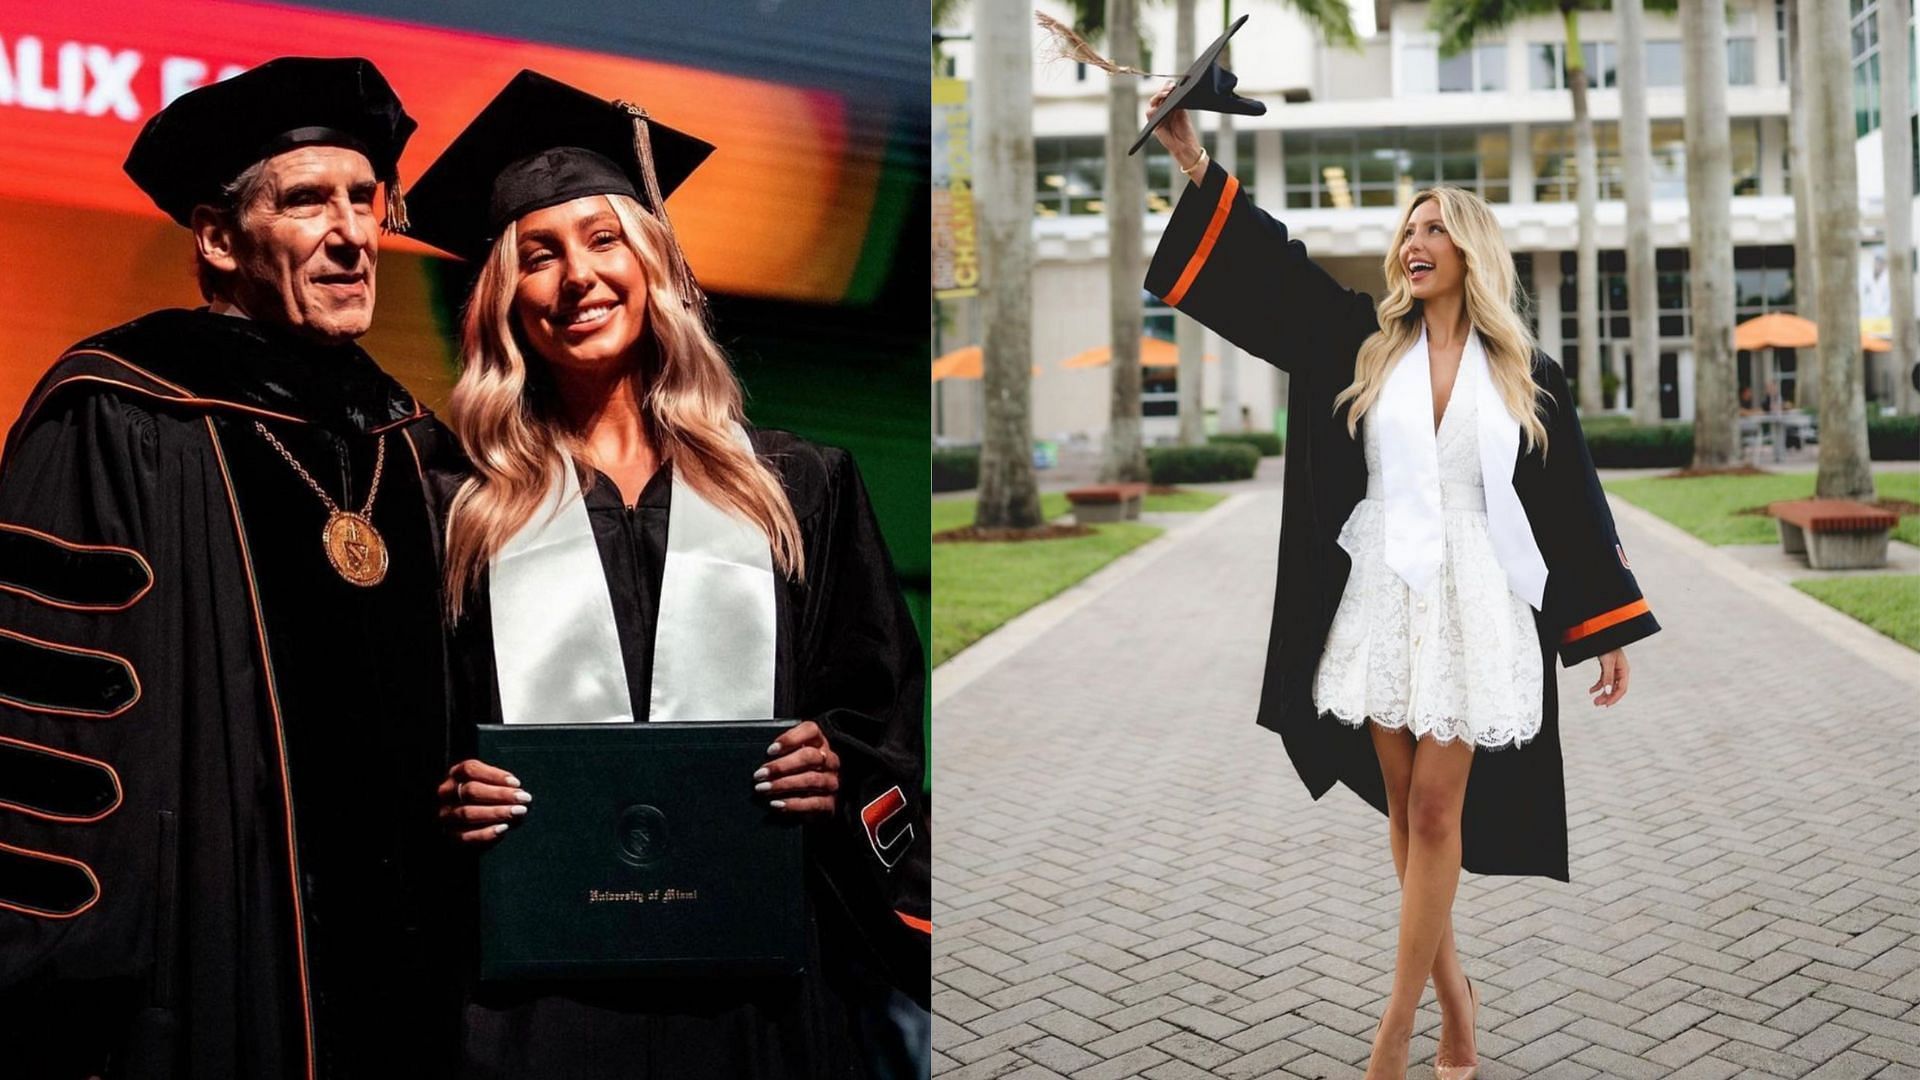 Earle getting her degree from the University of Miami. Credit: @alex_earle (IG)